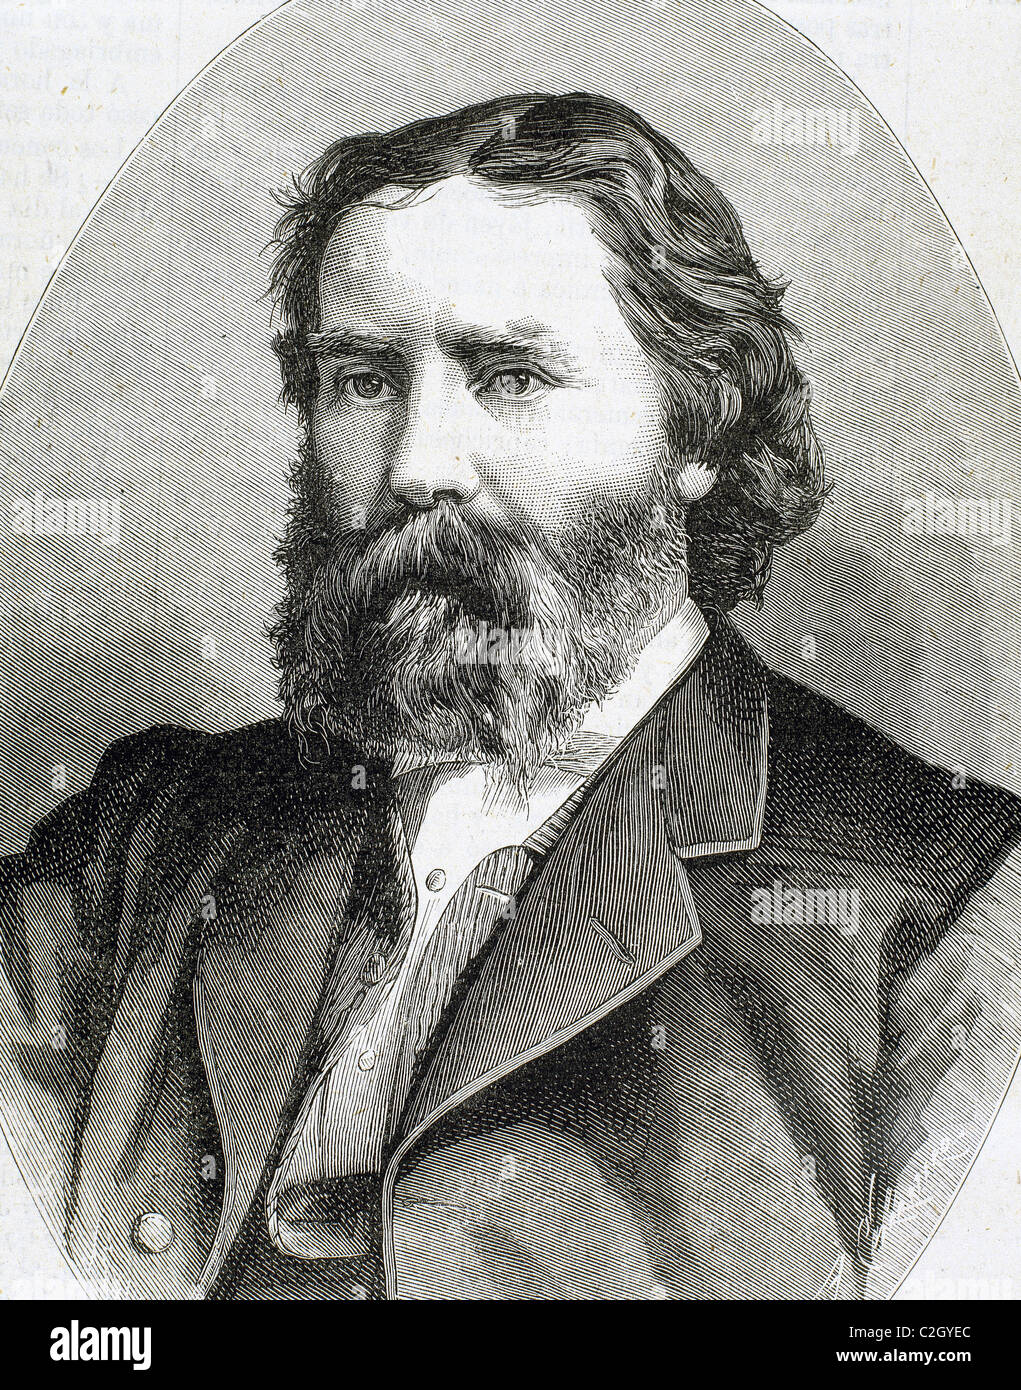 LOWELL, James (1819-1891). Poet, essayist and American diplomat. Engraving. Stock Photo